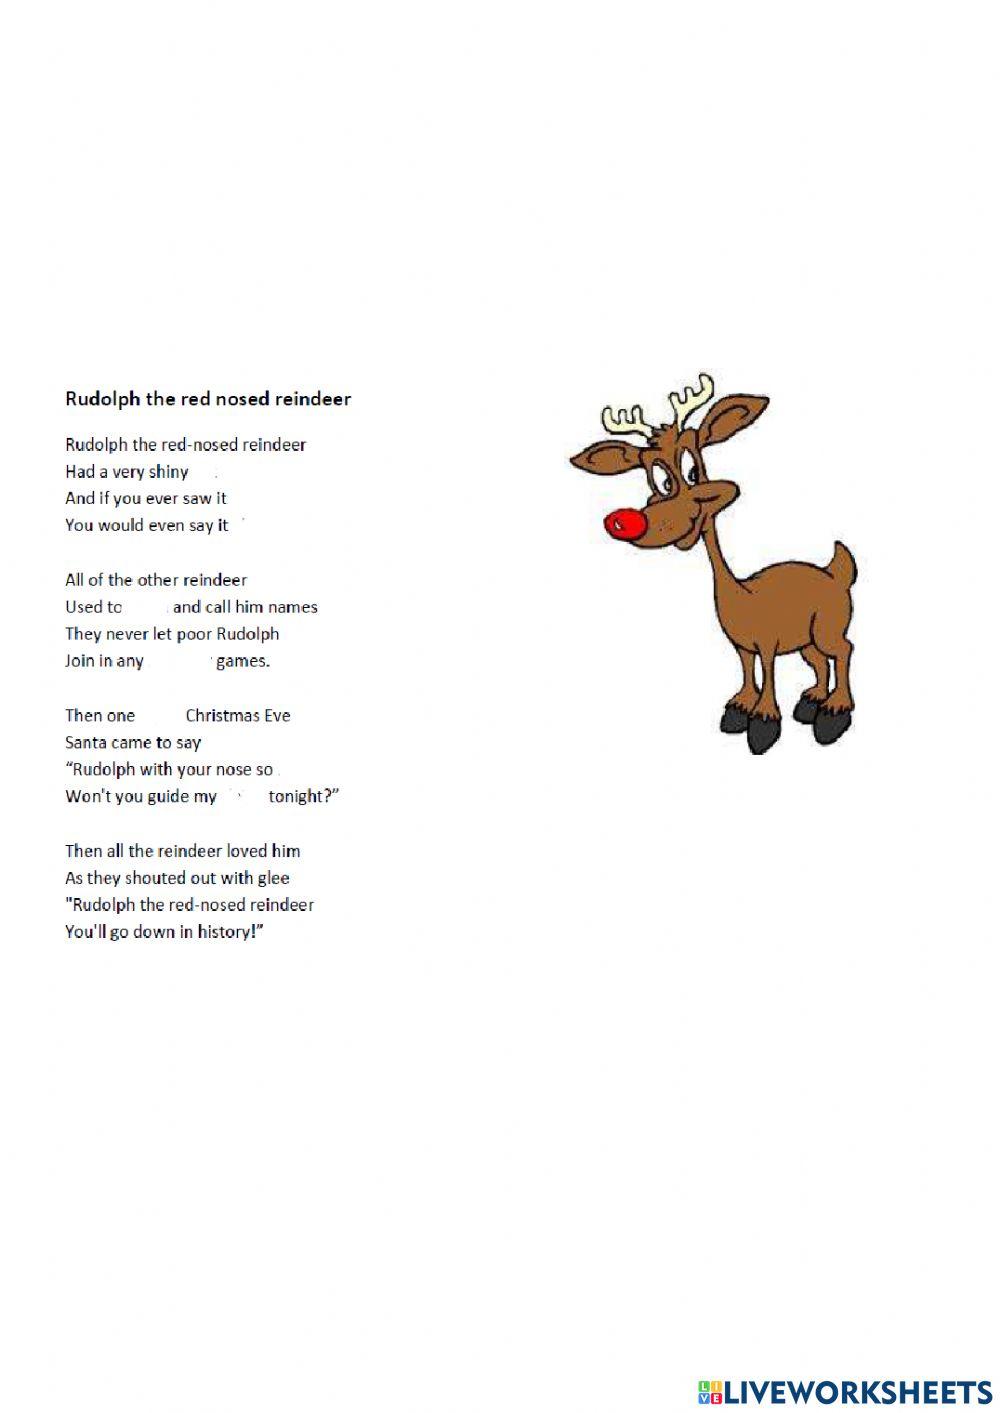 listening-Rudolph the red nose reindeer